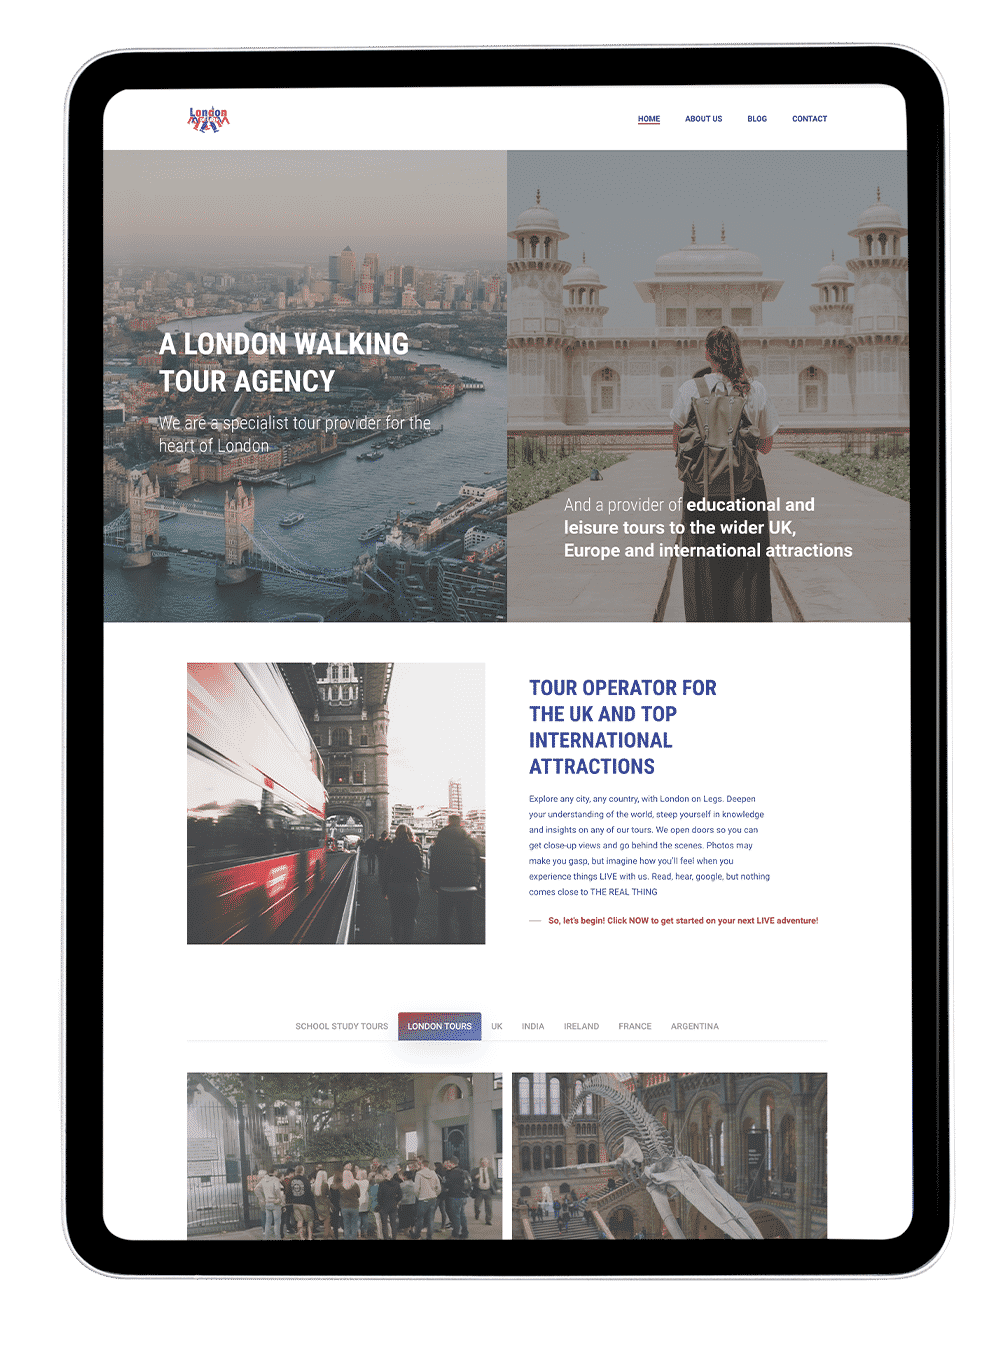 Our website design for a London tour guide